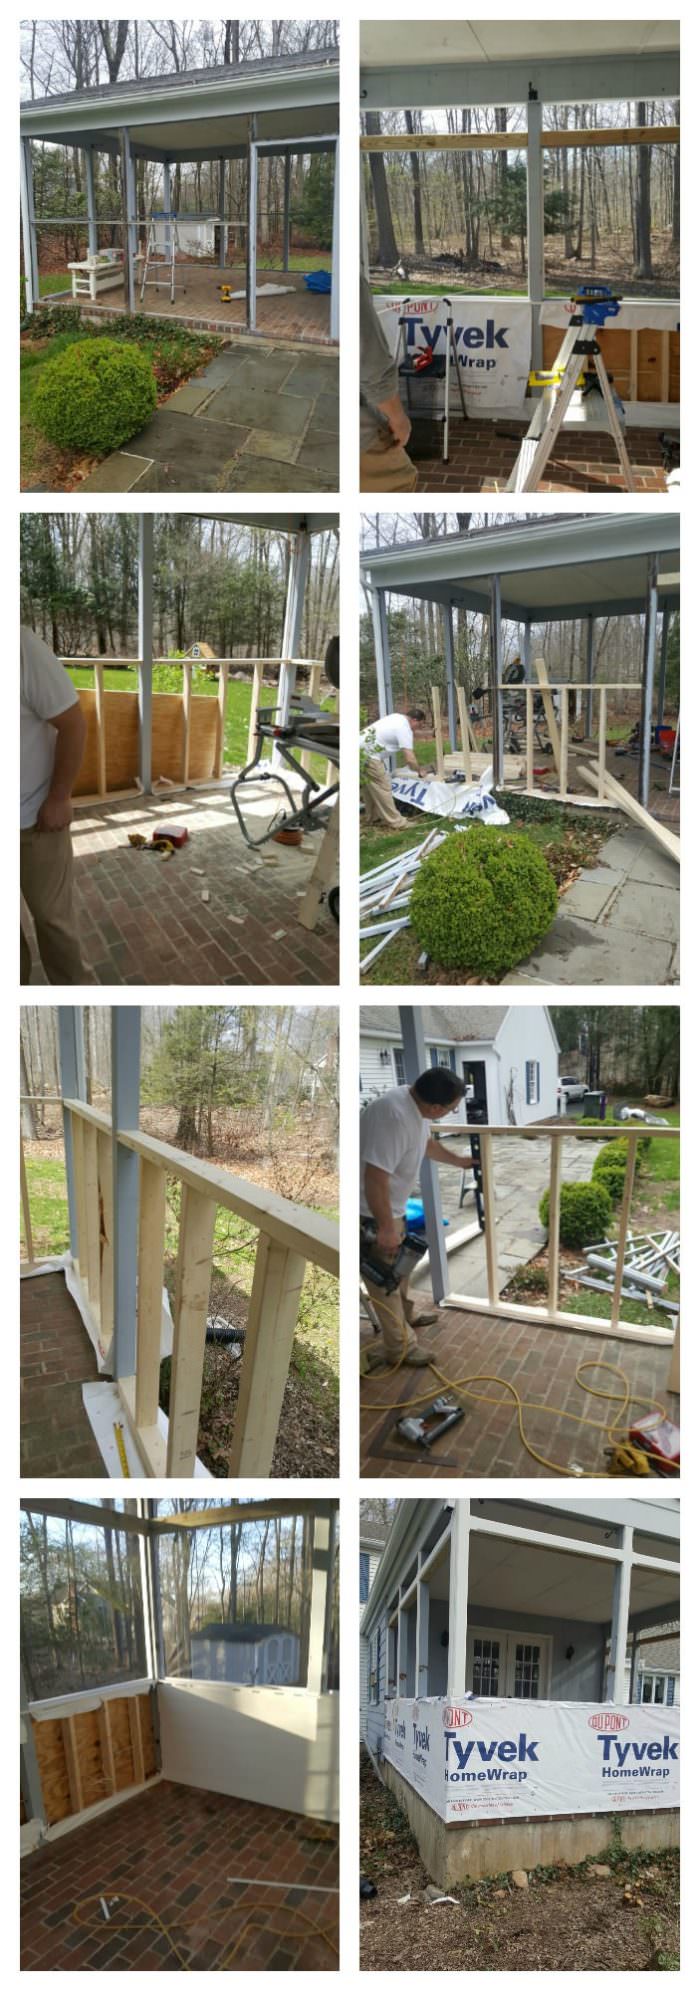 Screen Porch Makeover with Raymor & Flanigan // The before & after images along with screen porch ideas and makeover tips